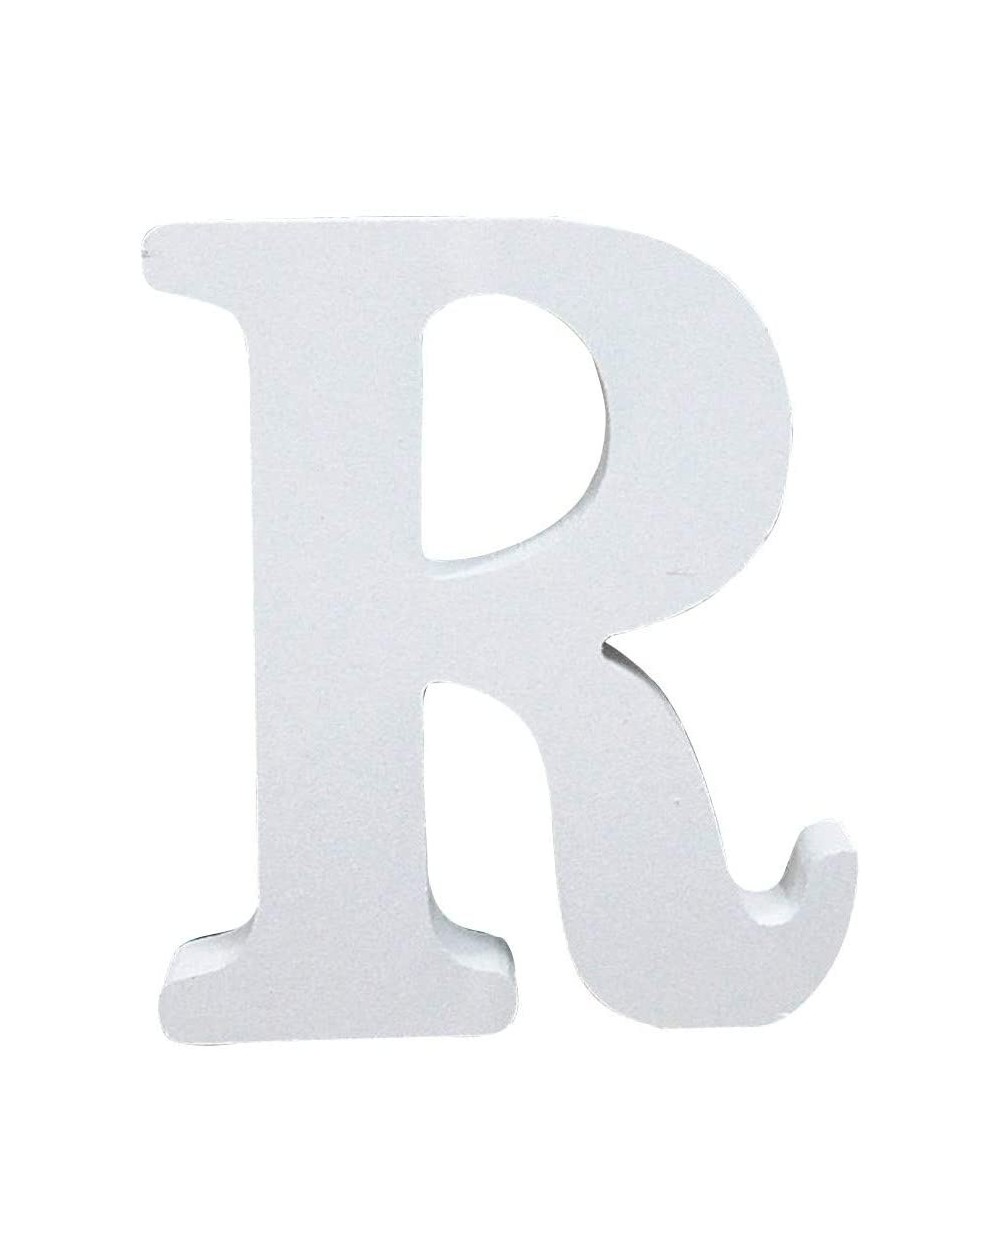 Cake Decorating Supplies Decorative Wooden Letters Log Alphabet Wedding Birthday Party Home Decorations for Children Kids Bed...